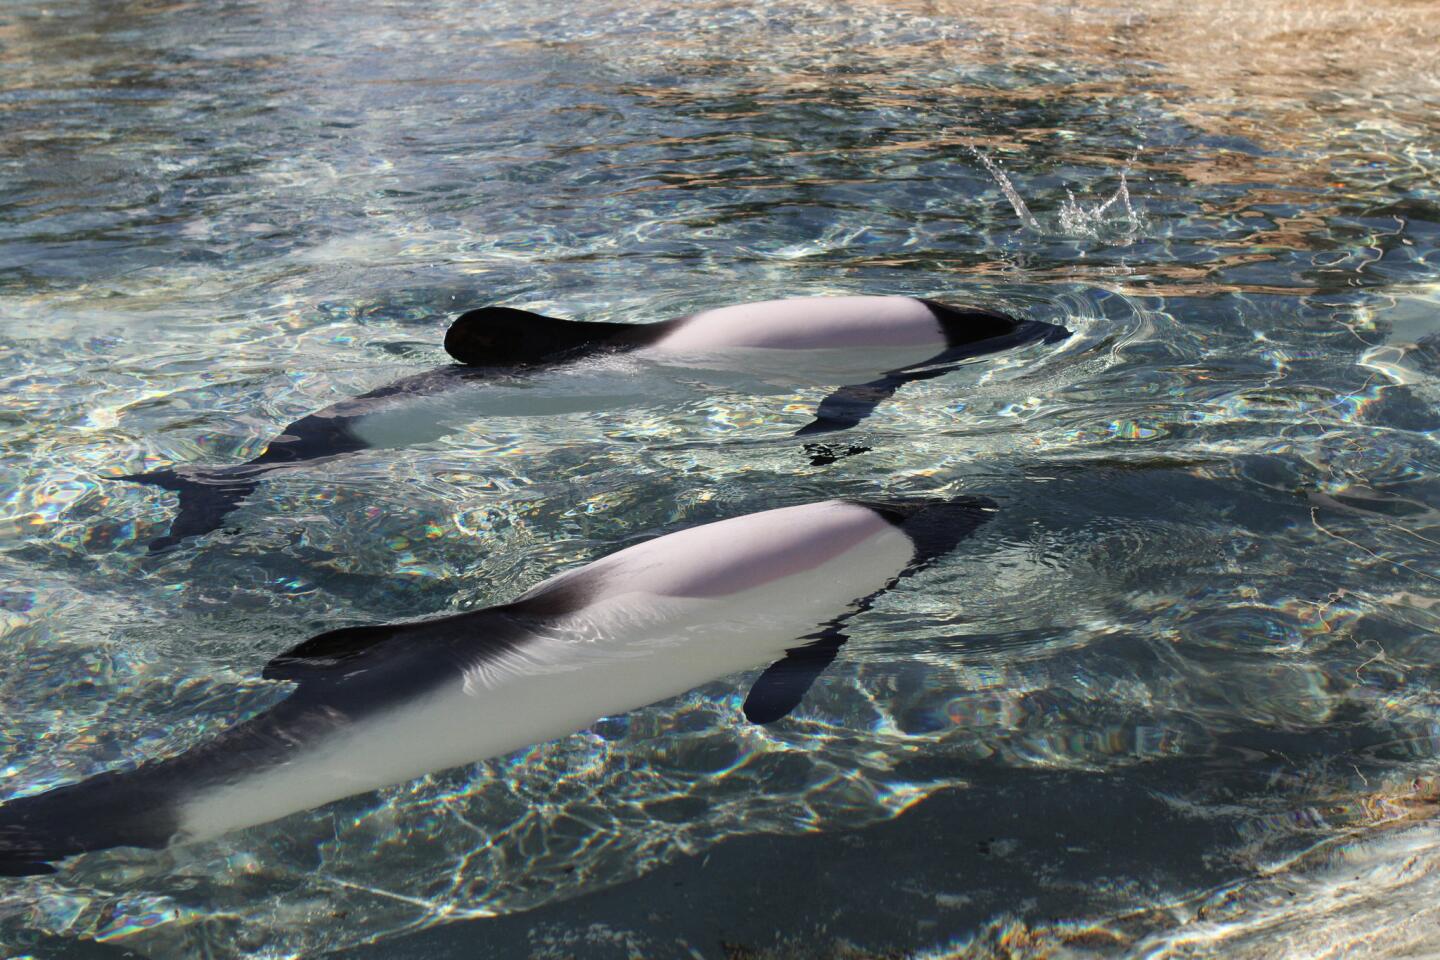 Commerson's dolphins at SeaWorld‚Äôs Aquatica water park. The small, quick dolphins with penguinlike markings are rare to see in captivity. January 25, 2016 (Rich Pope, Orlando Sentinel)